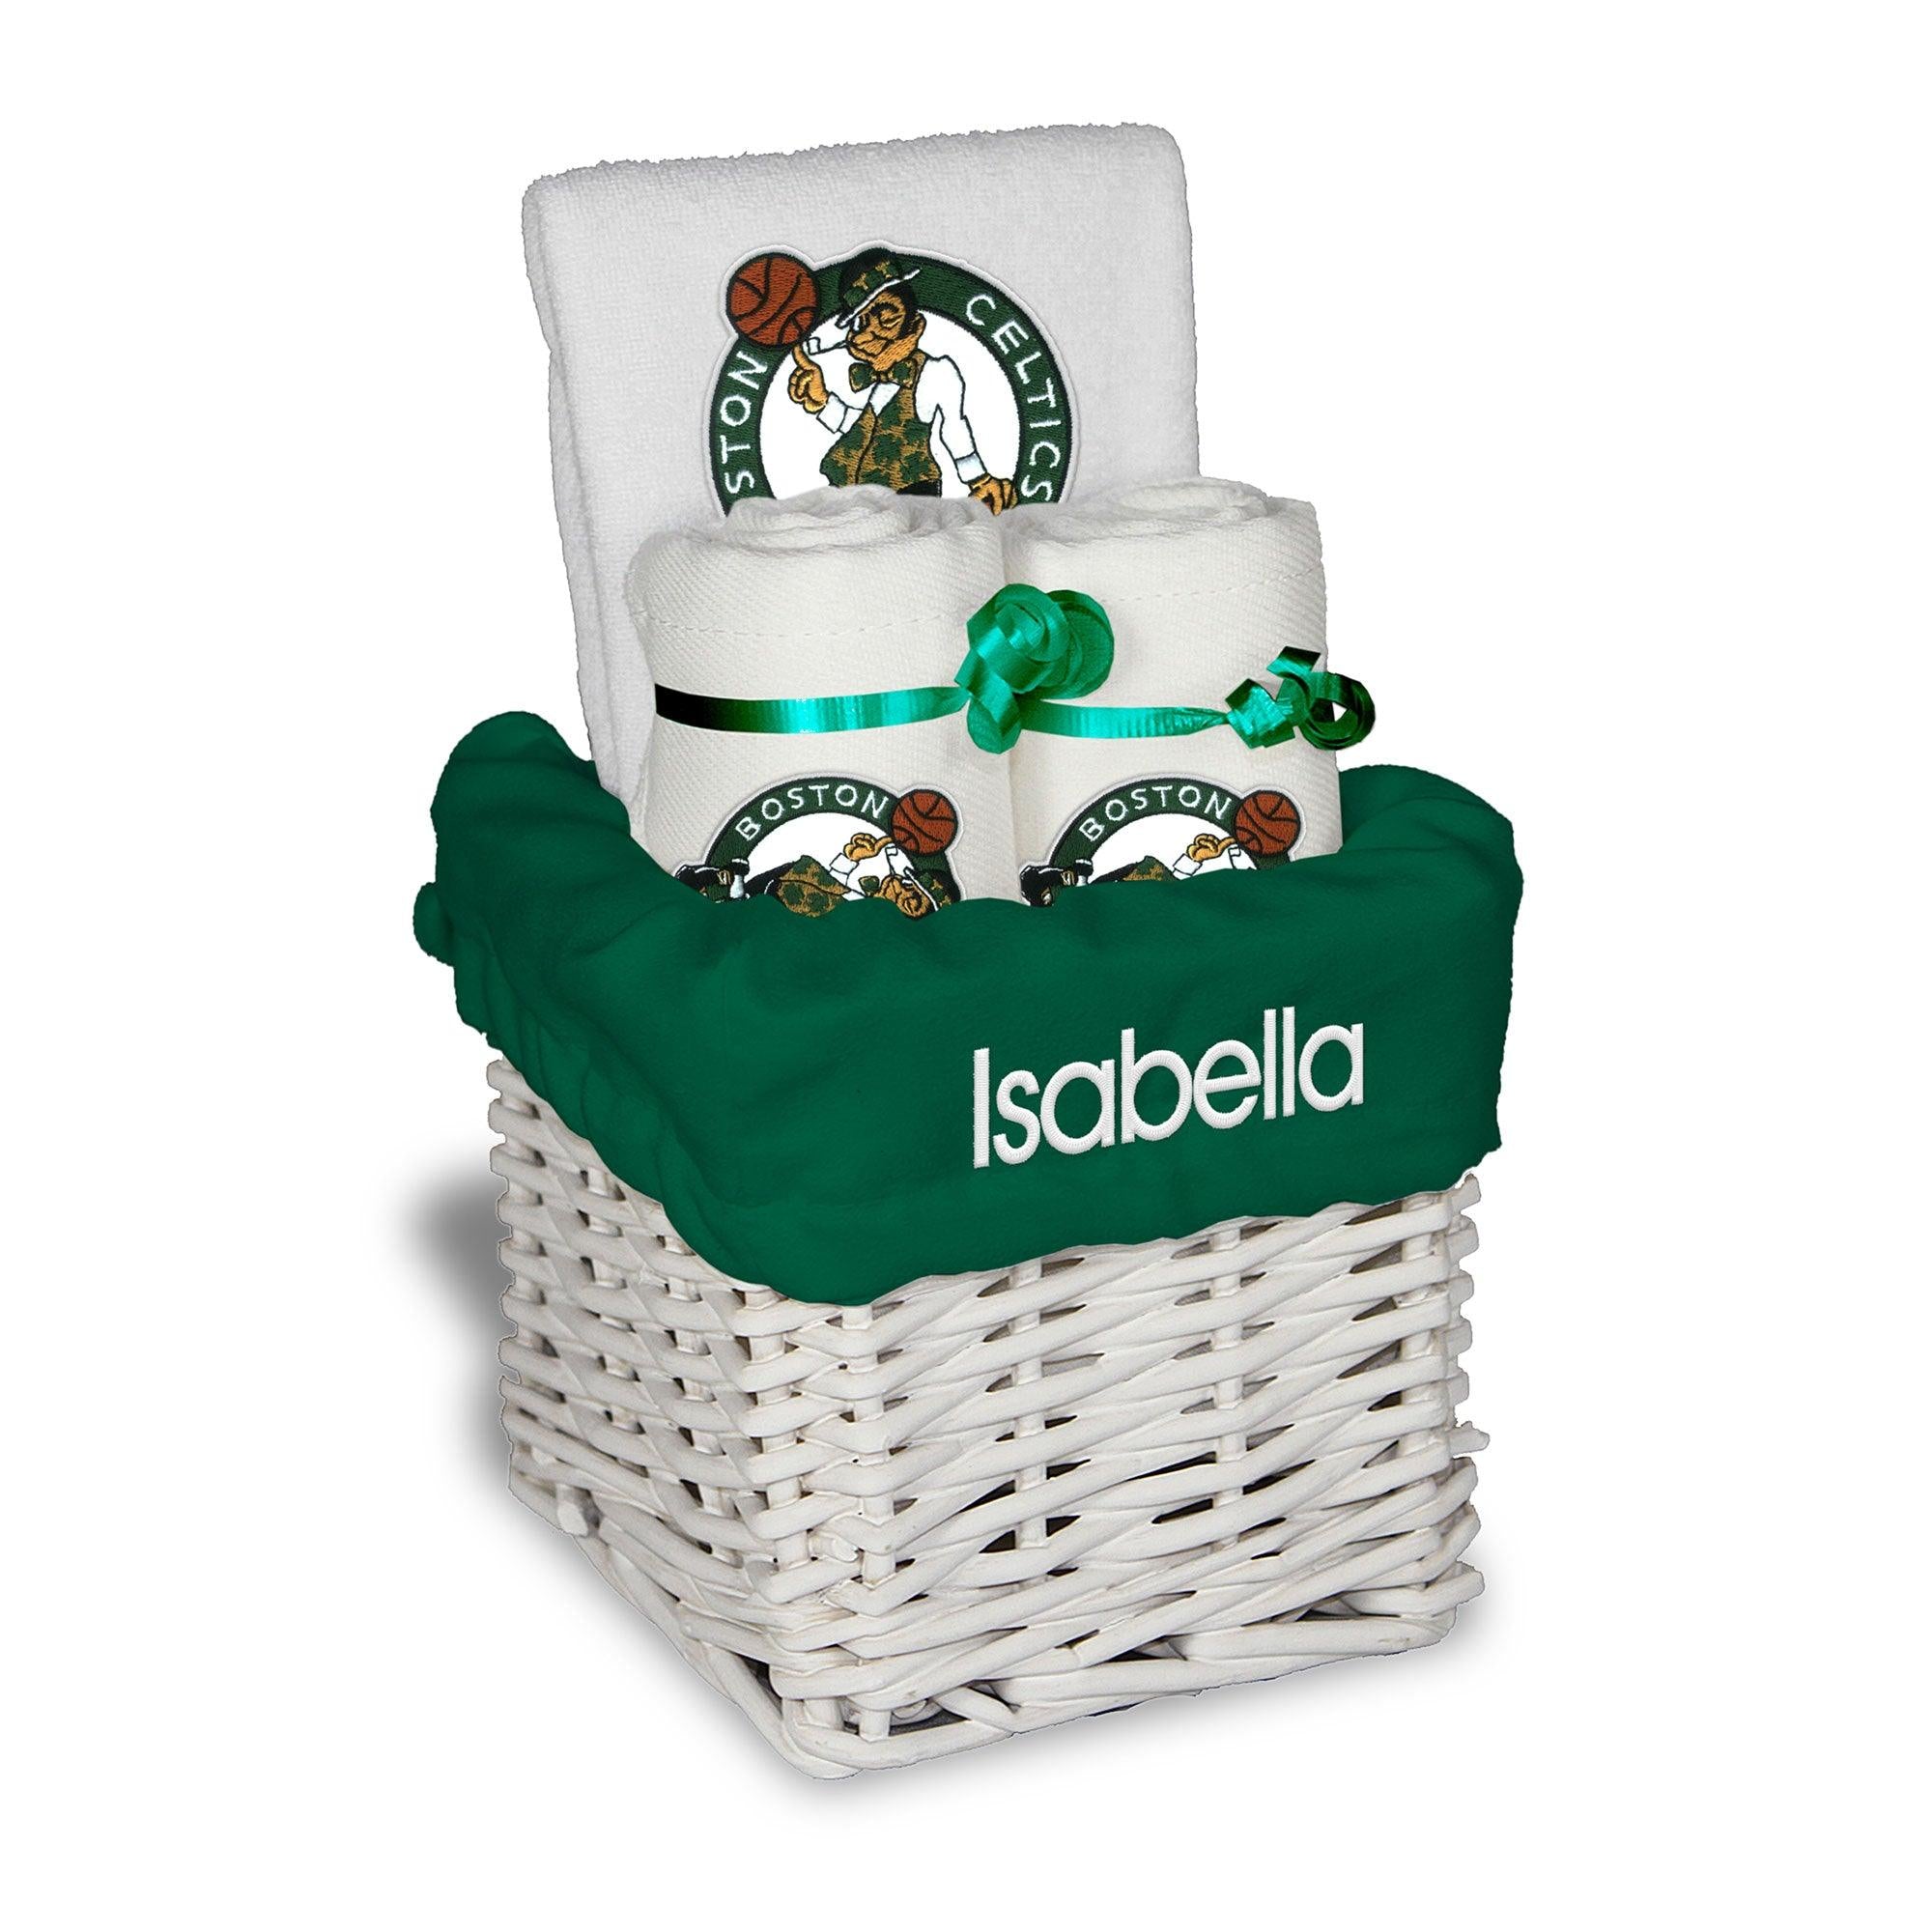 Celtics Are The Balls Gifts & Merchandise for Sale